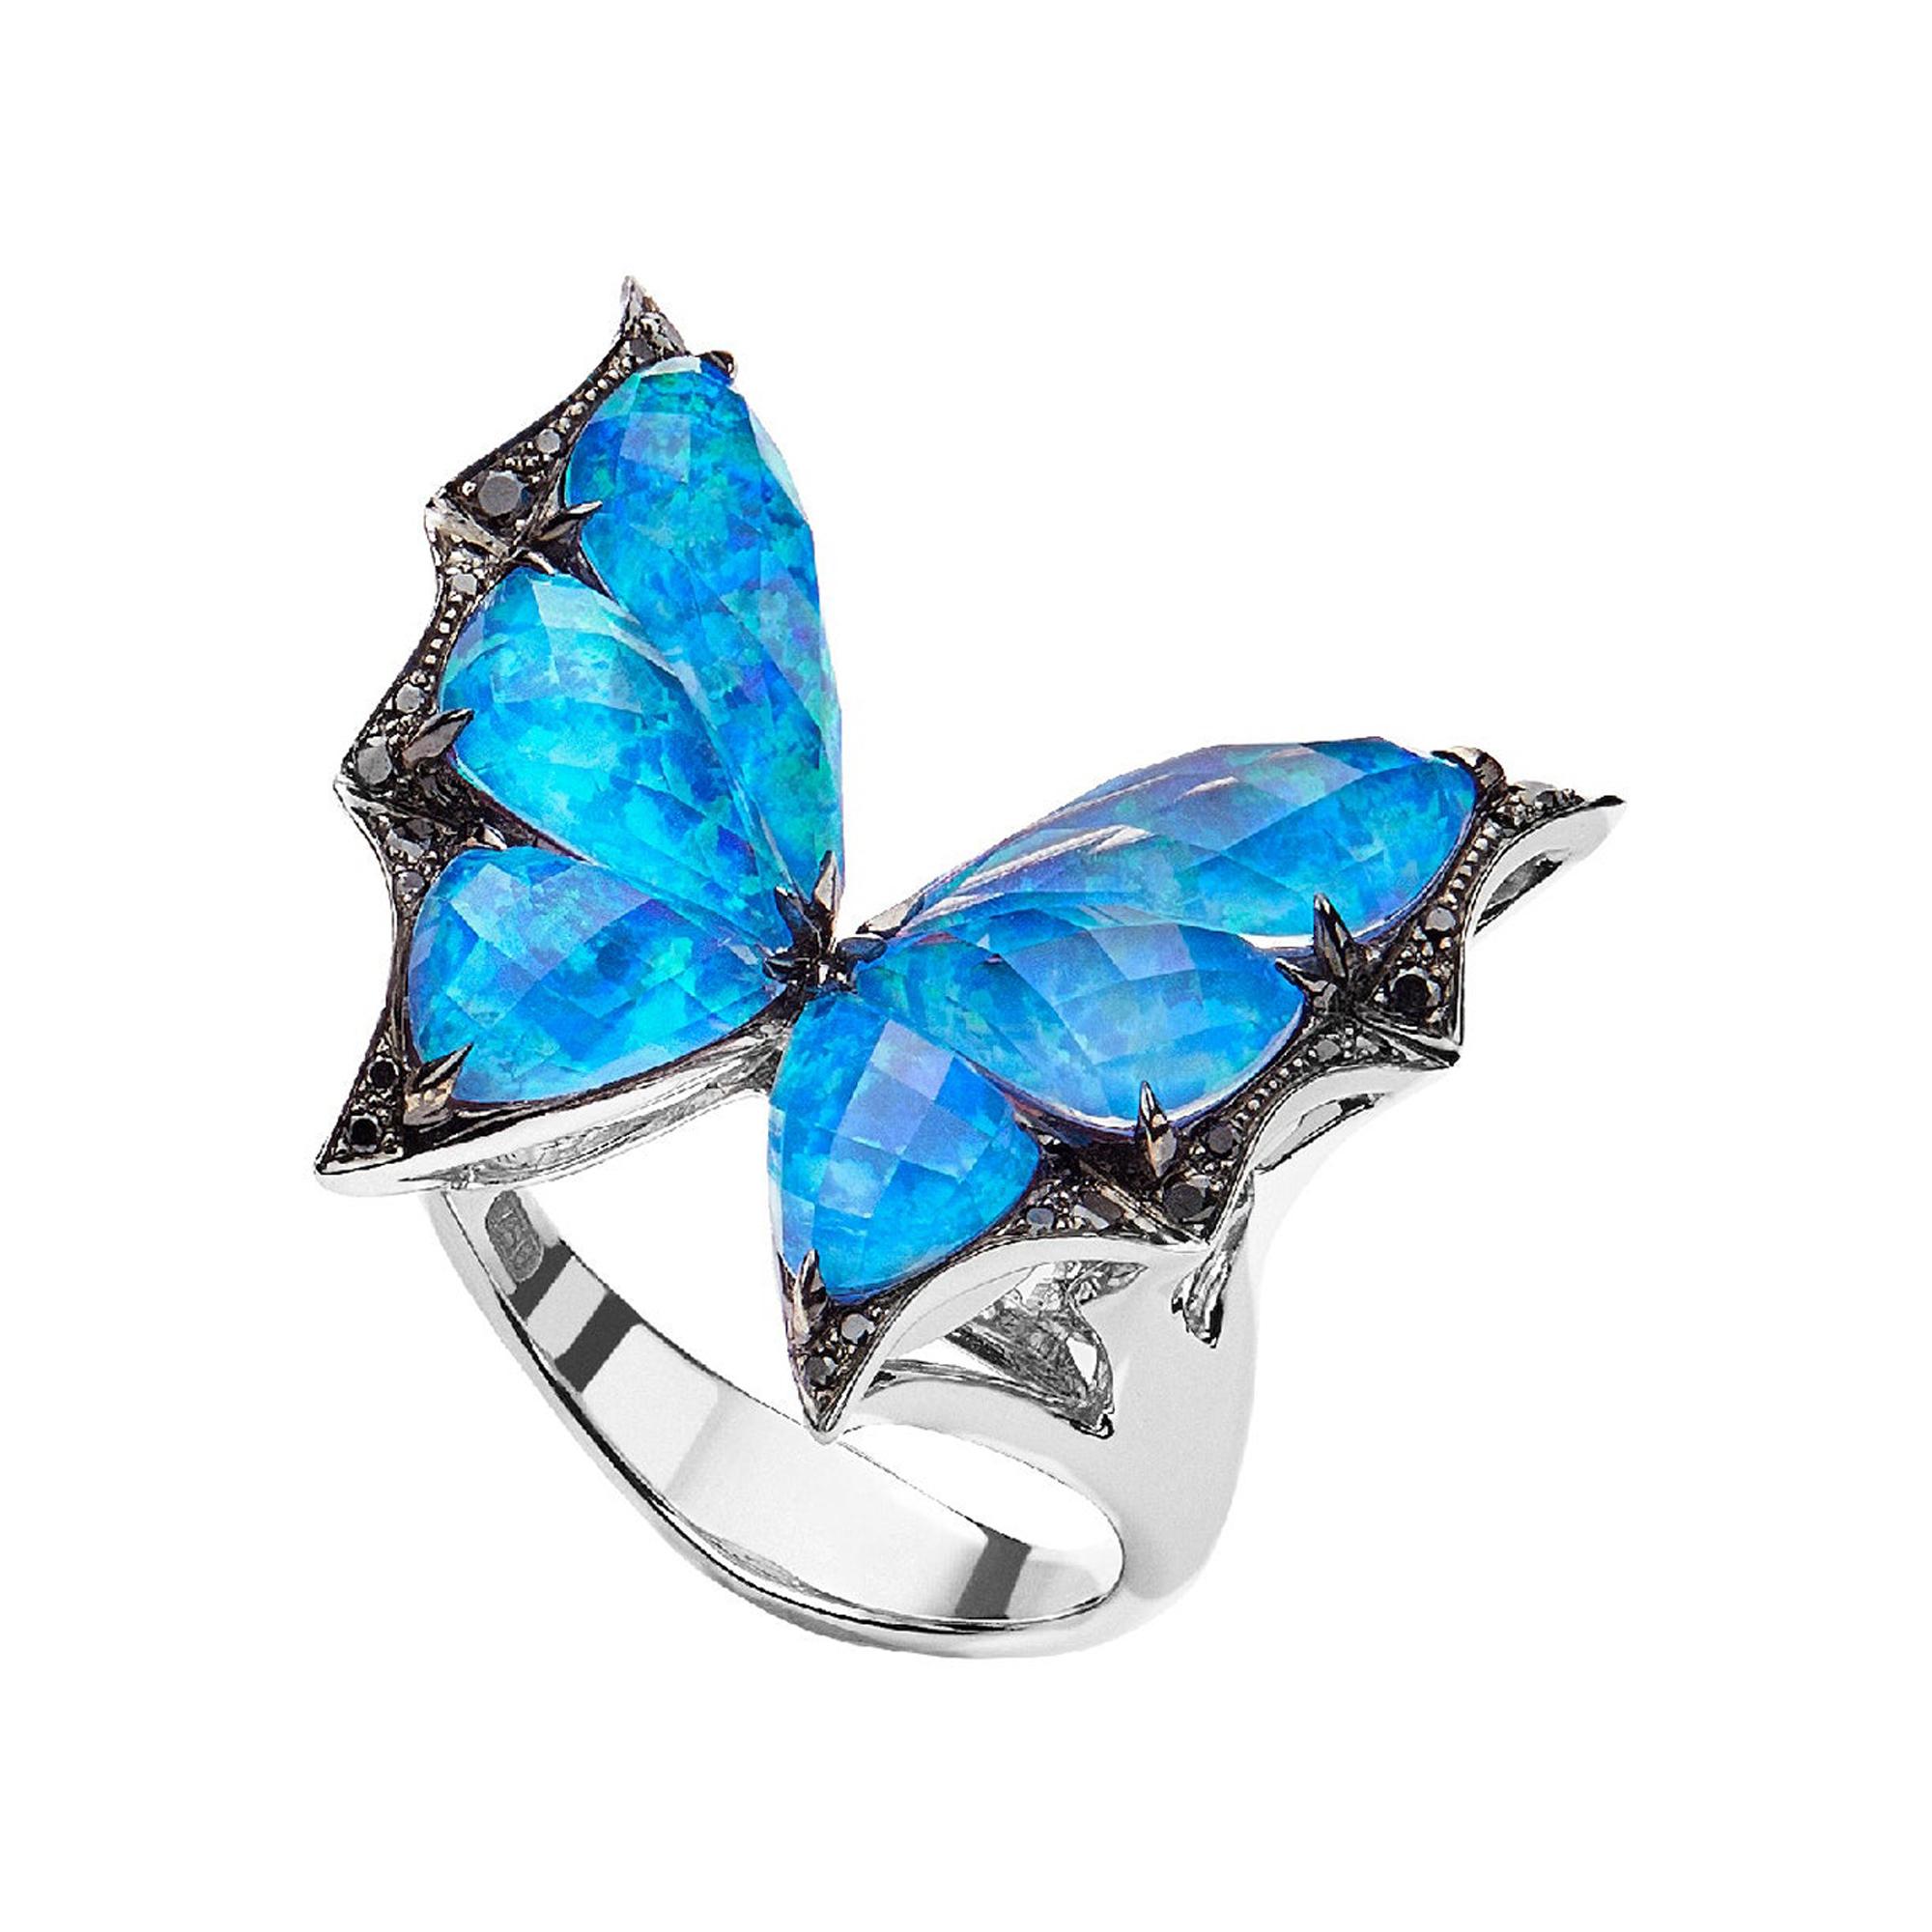 For Sale:  Stephen Webster Fly by Night Black Opalescent Crystal Haze and Diamond Ring